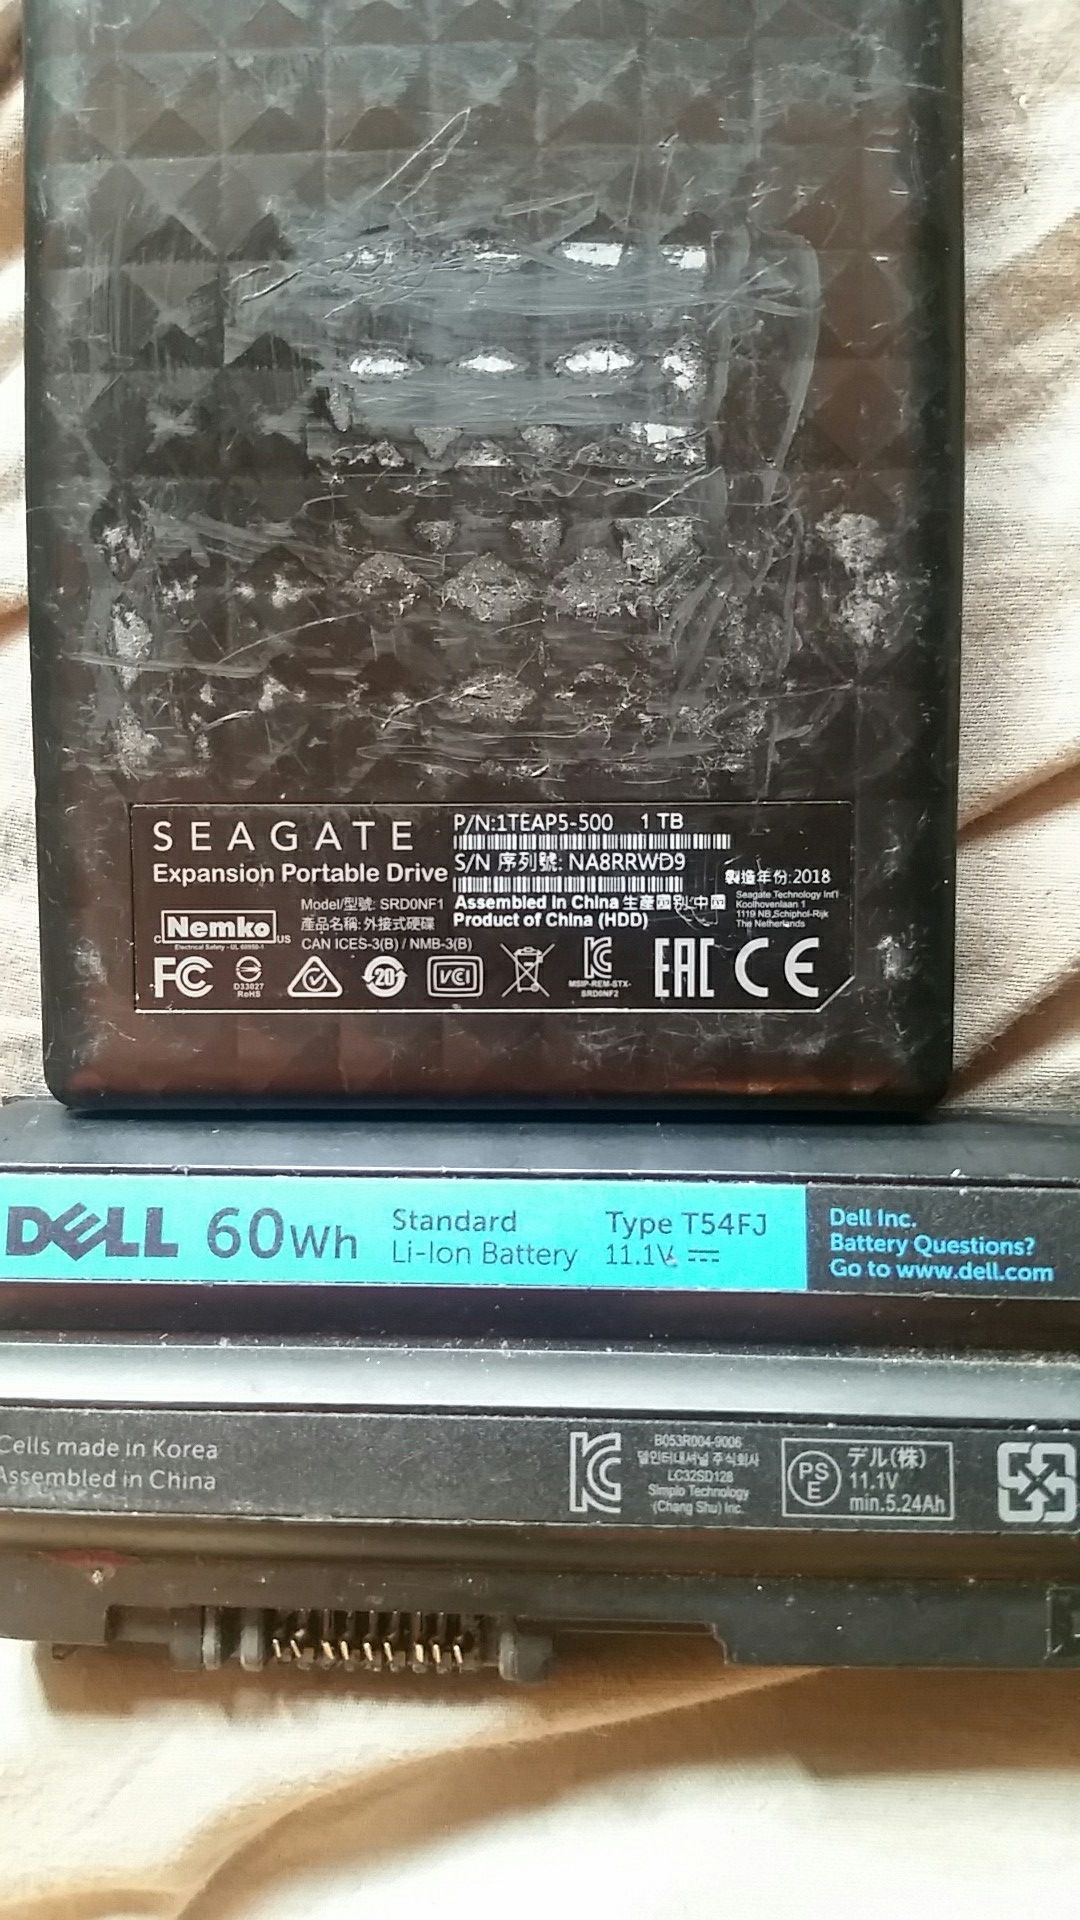 Dell laptop battery and portable drive